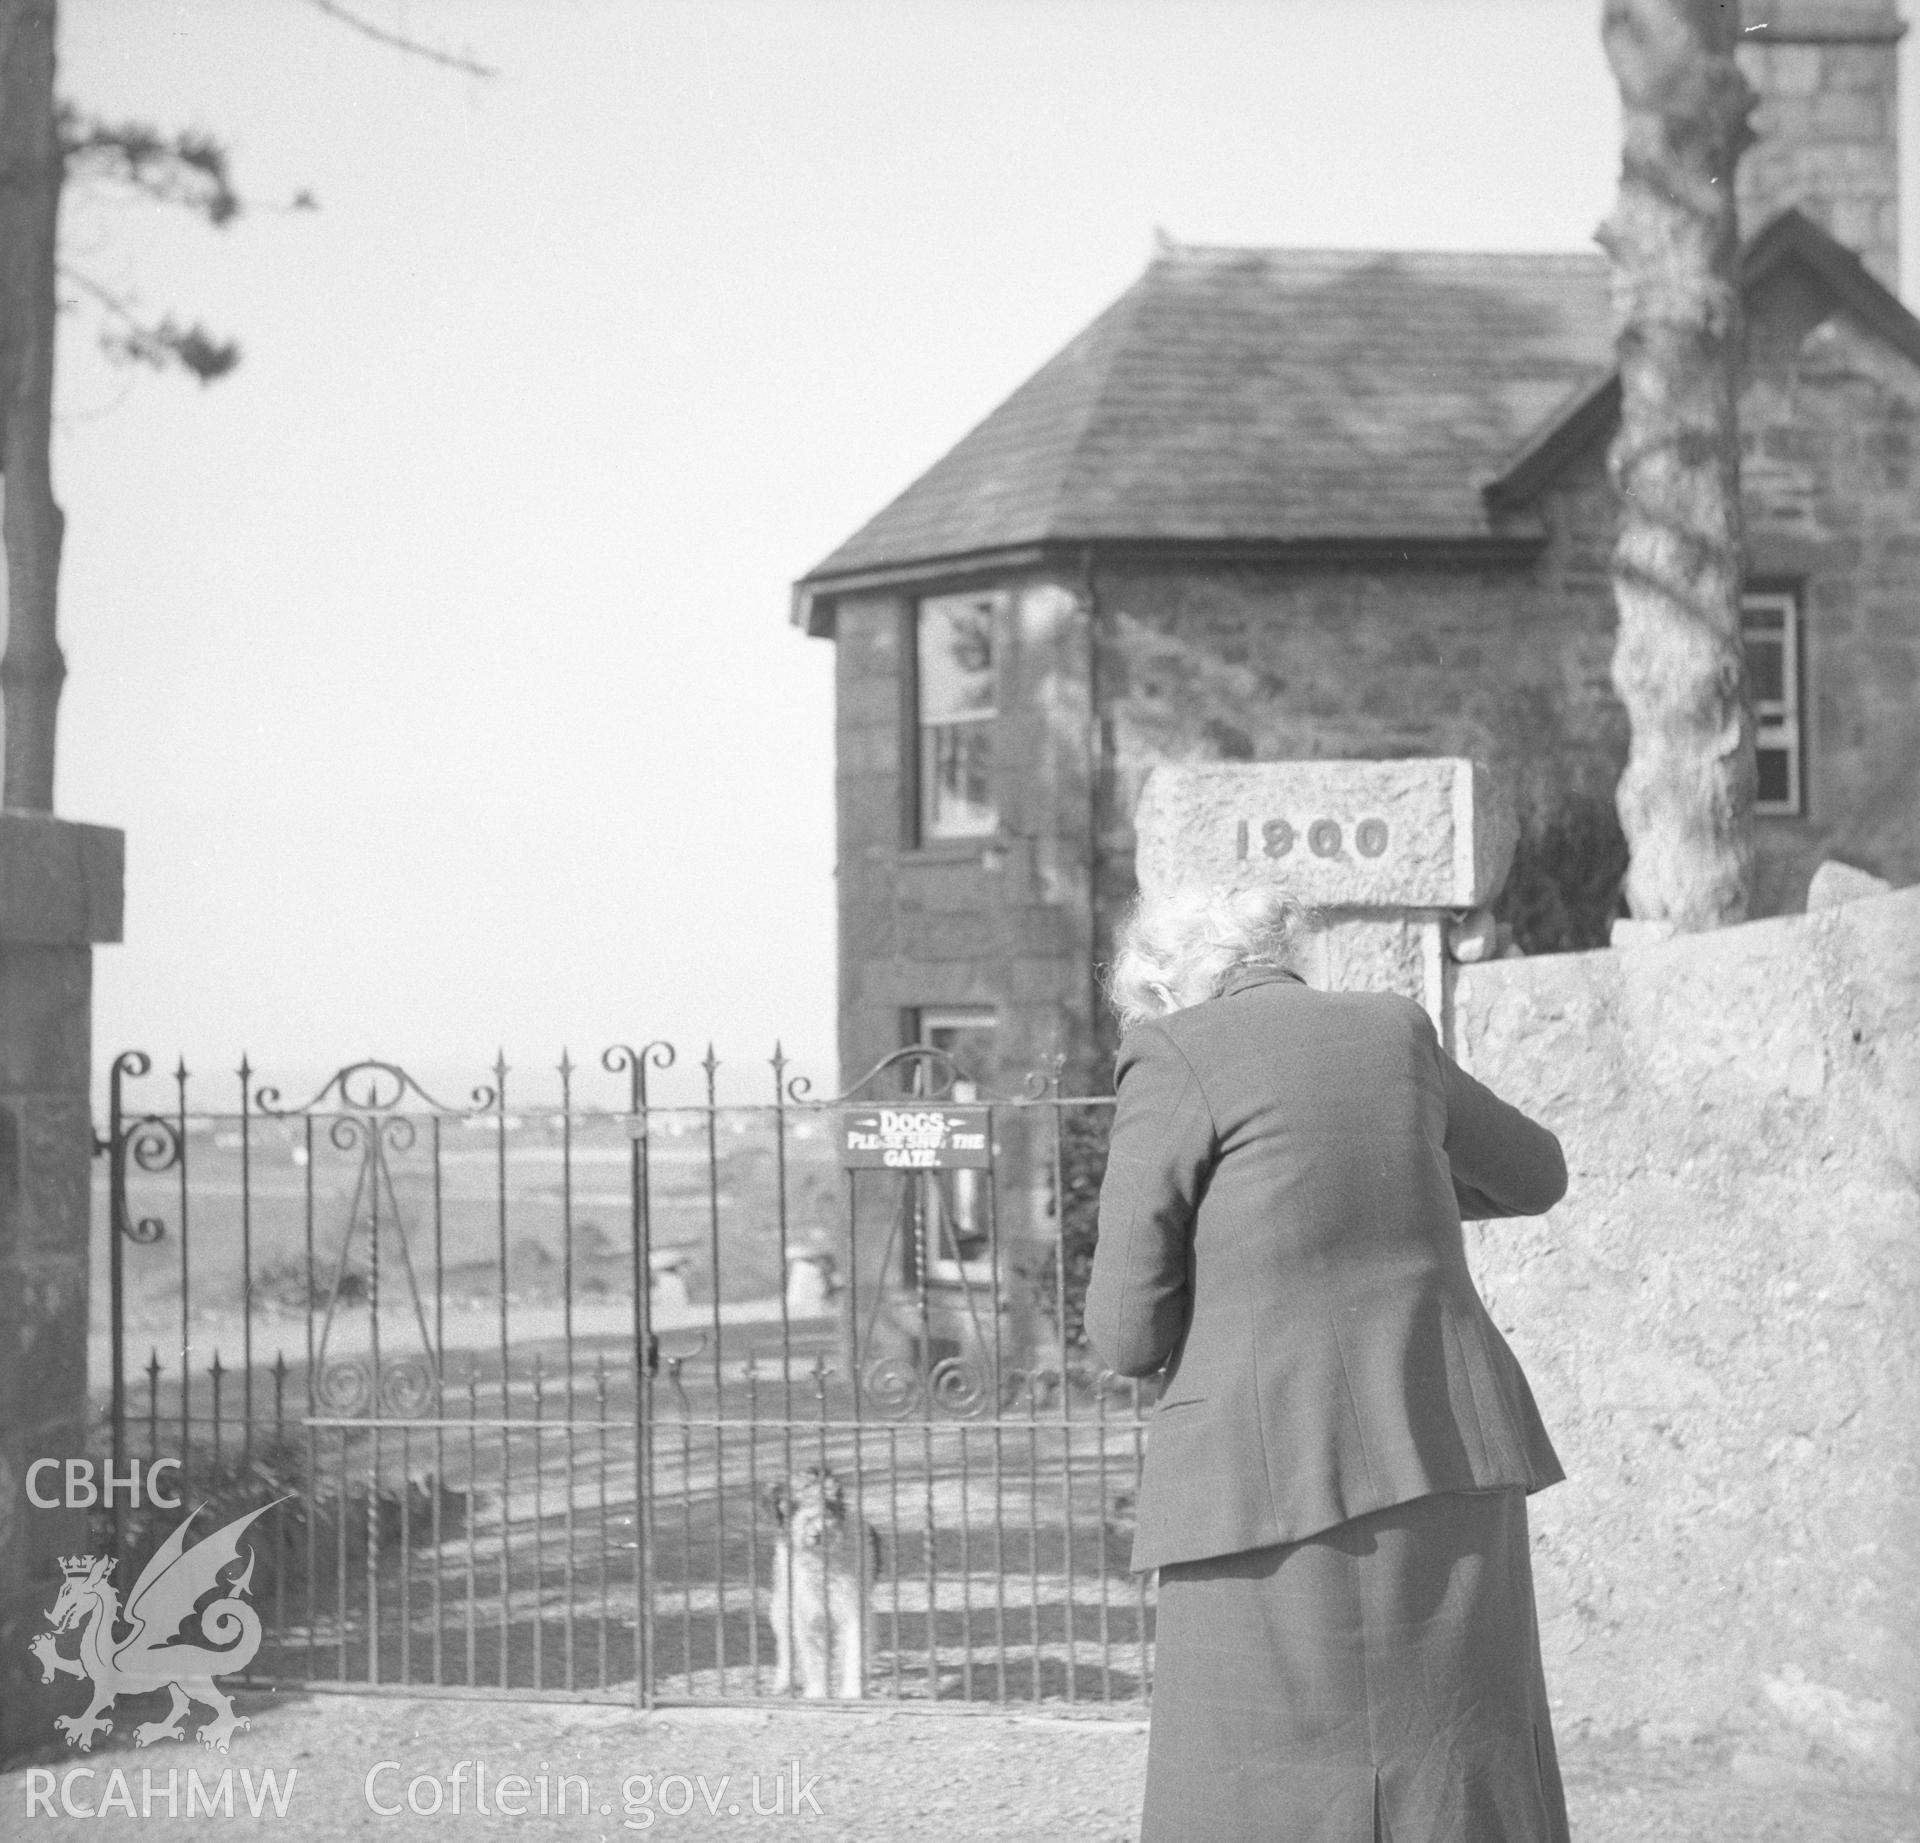 Digital copy of an undated nitrate negative showing a view of figure at the entrance of Coed Mawr, Merioneth.